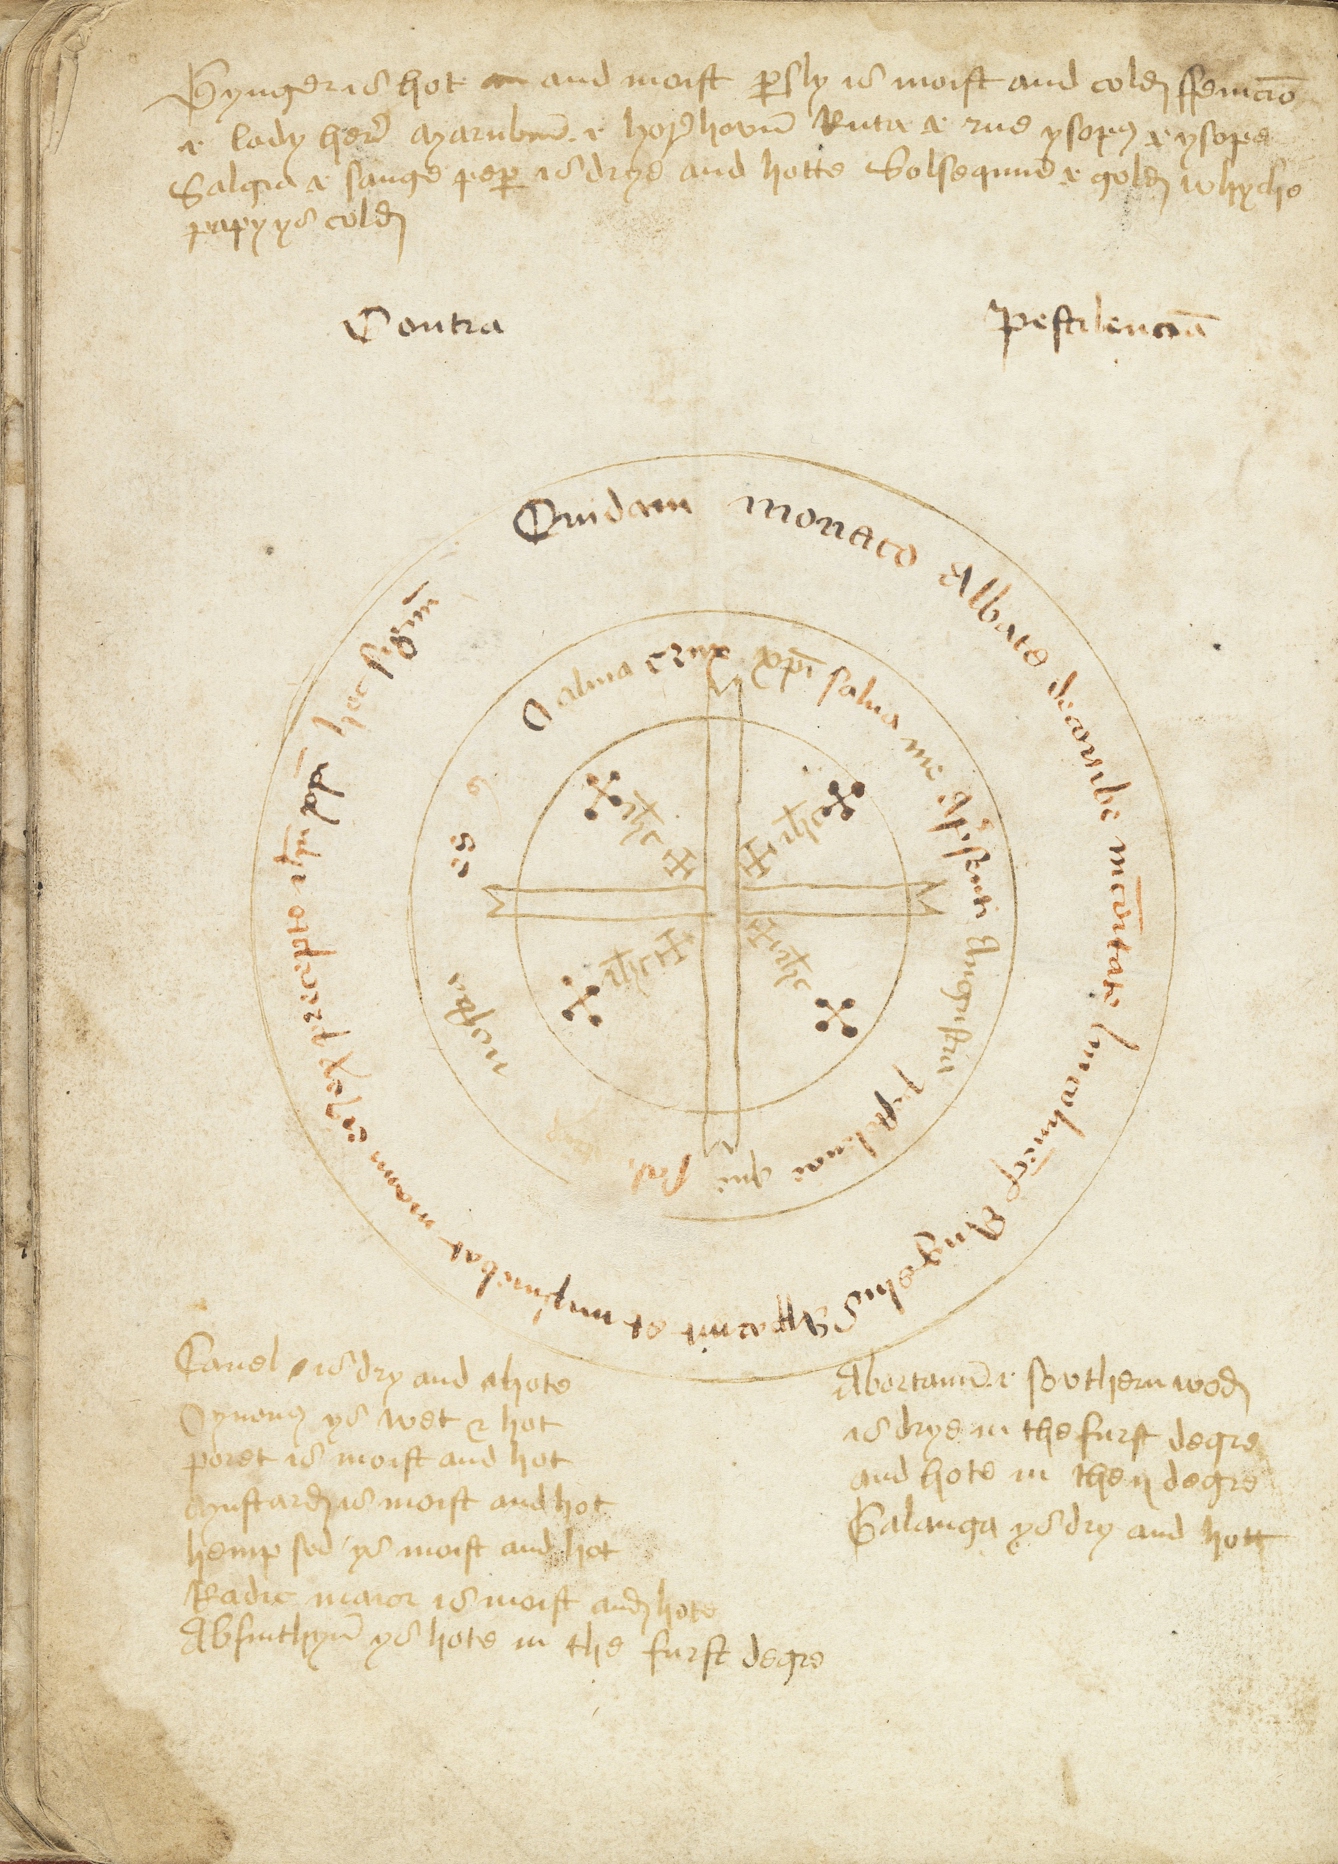 Circular drawing of a charm with medieval text on a yellowing page.